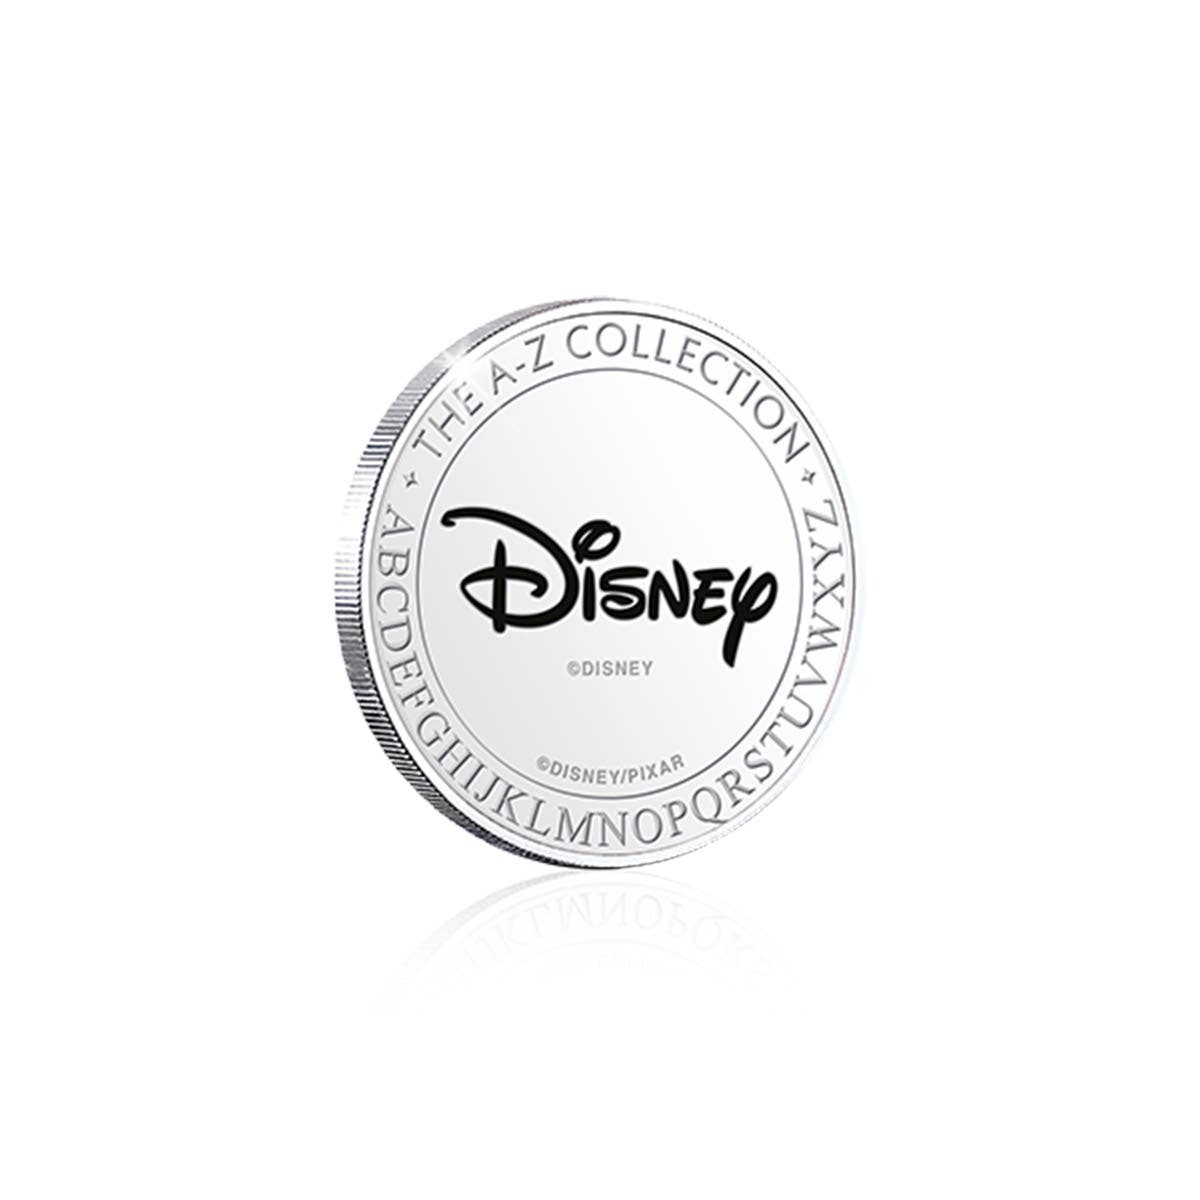 Disney J is for Jasmine Silver-Plated Commemorative